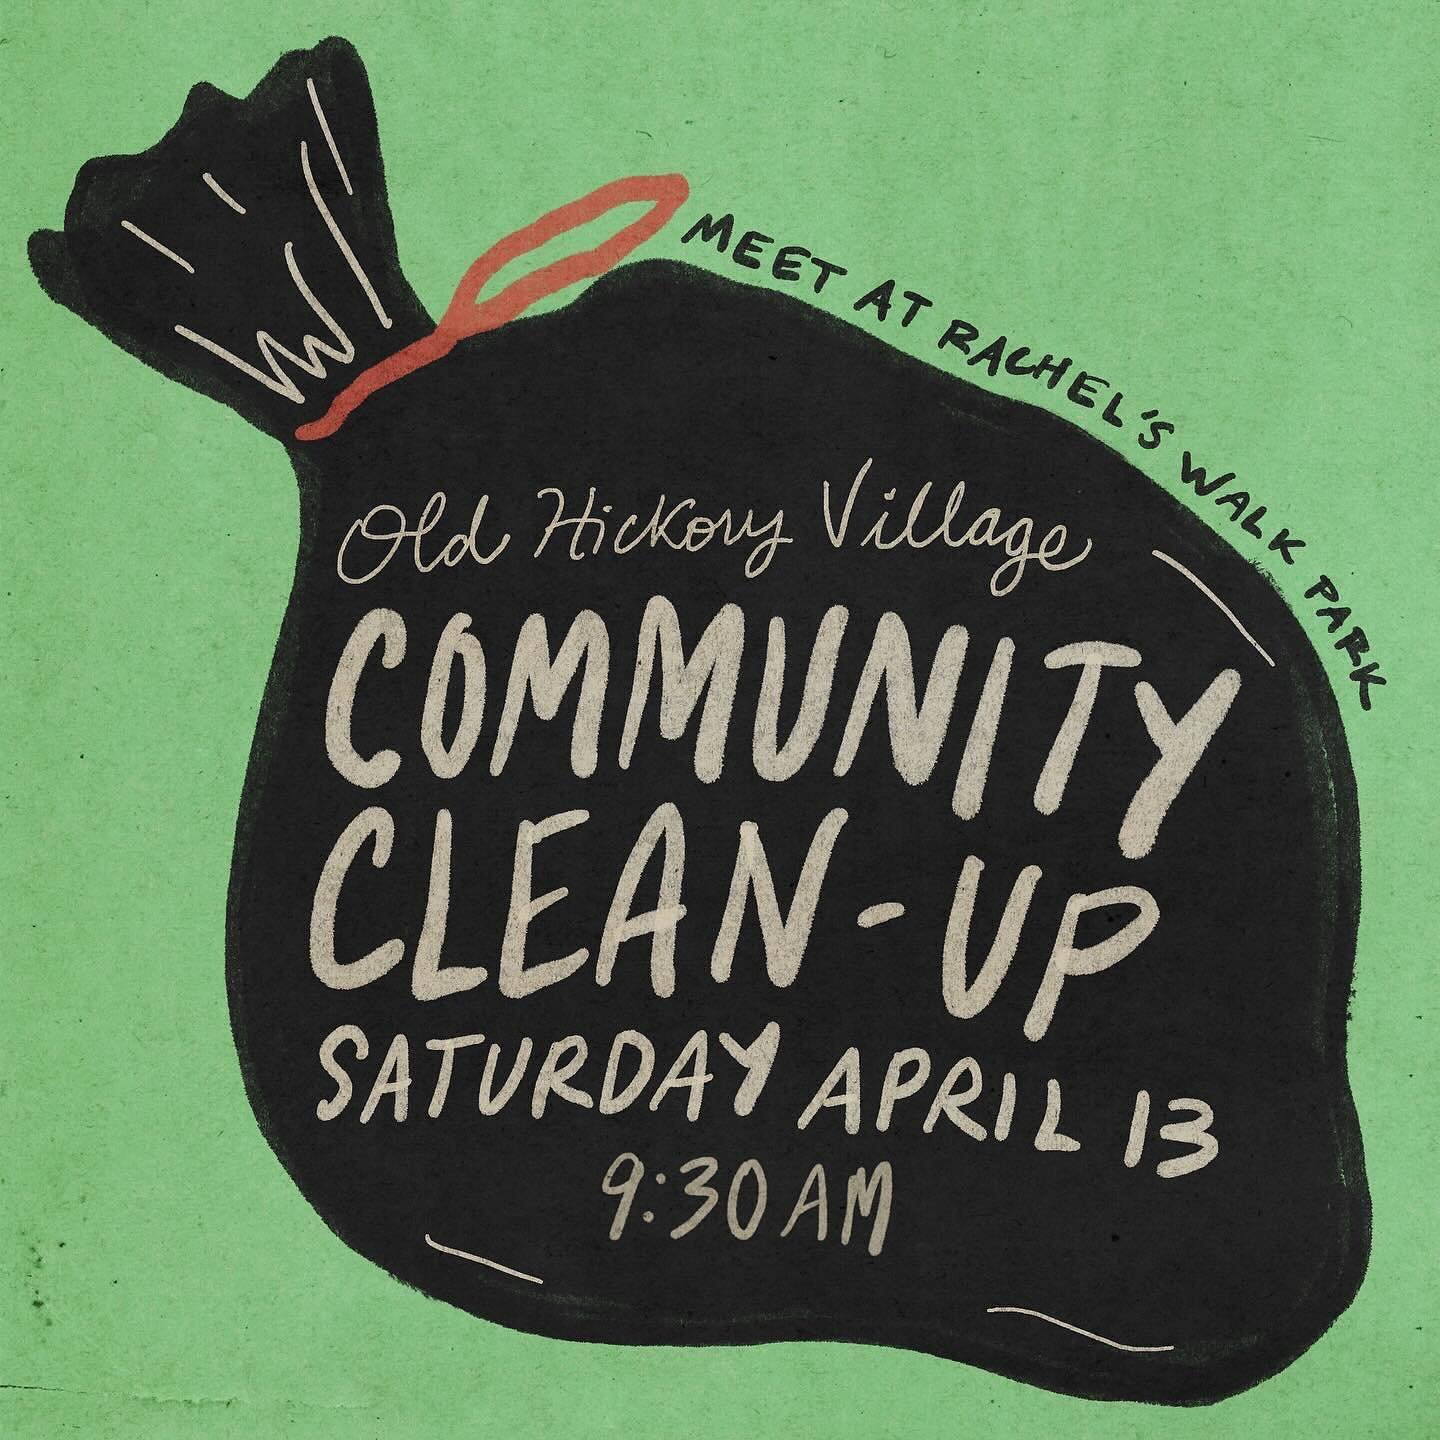 Join the Old Hickory Village Neighborhood Association in a Community Clean-up this Saturday, April 13, at 9:30 AM at Rachel&rsquo;s Walk Park. Afterwards, our friends at @southerncrystalco will be offering refreshments and a discount at their shop fo